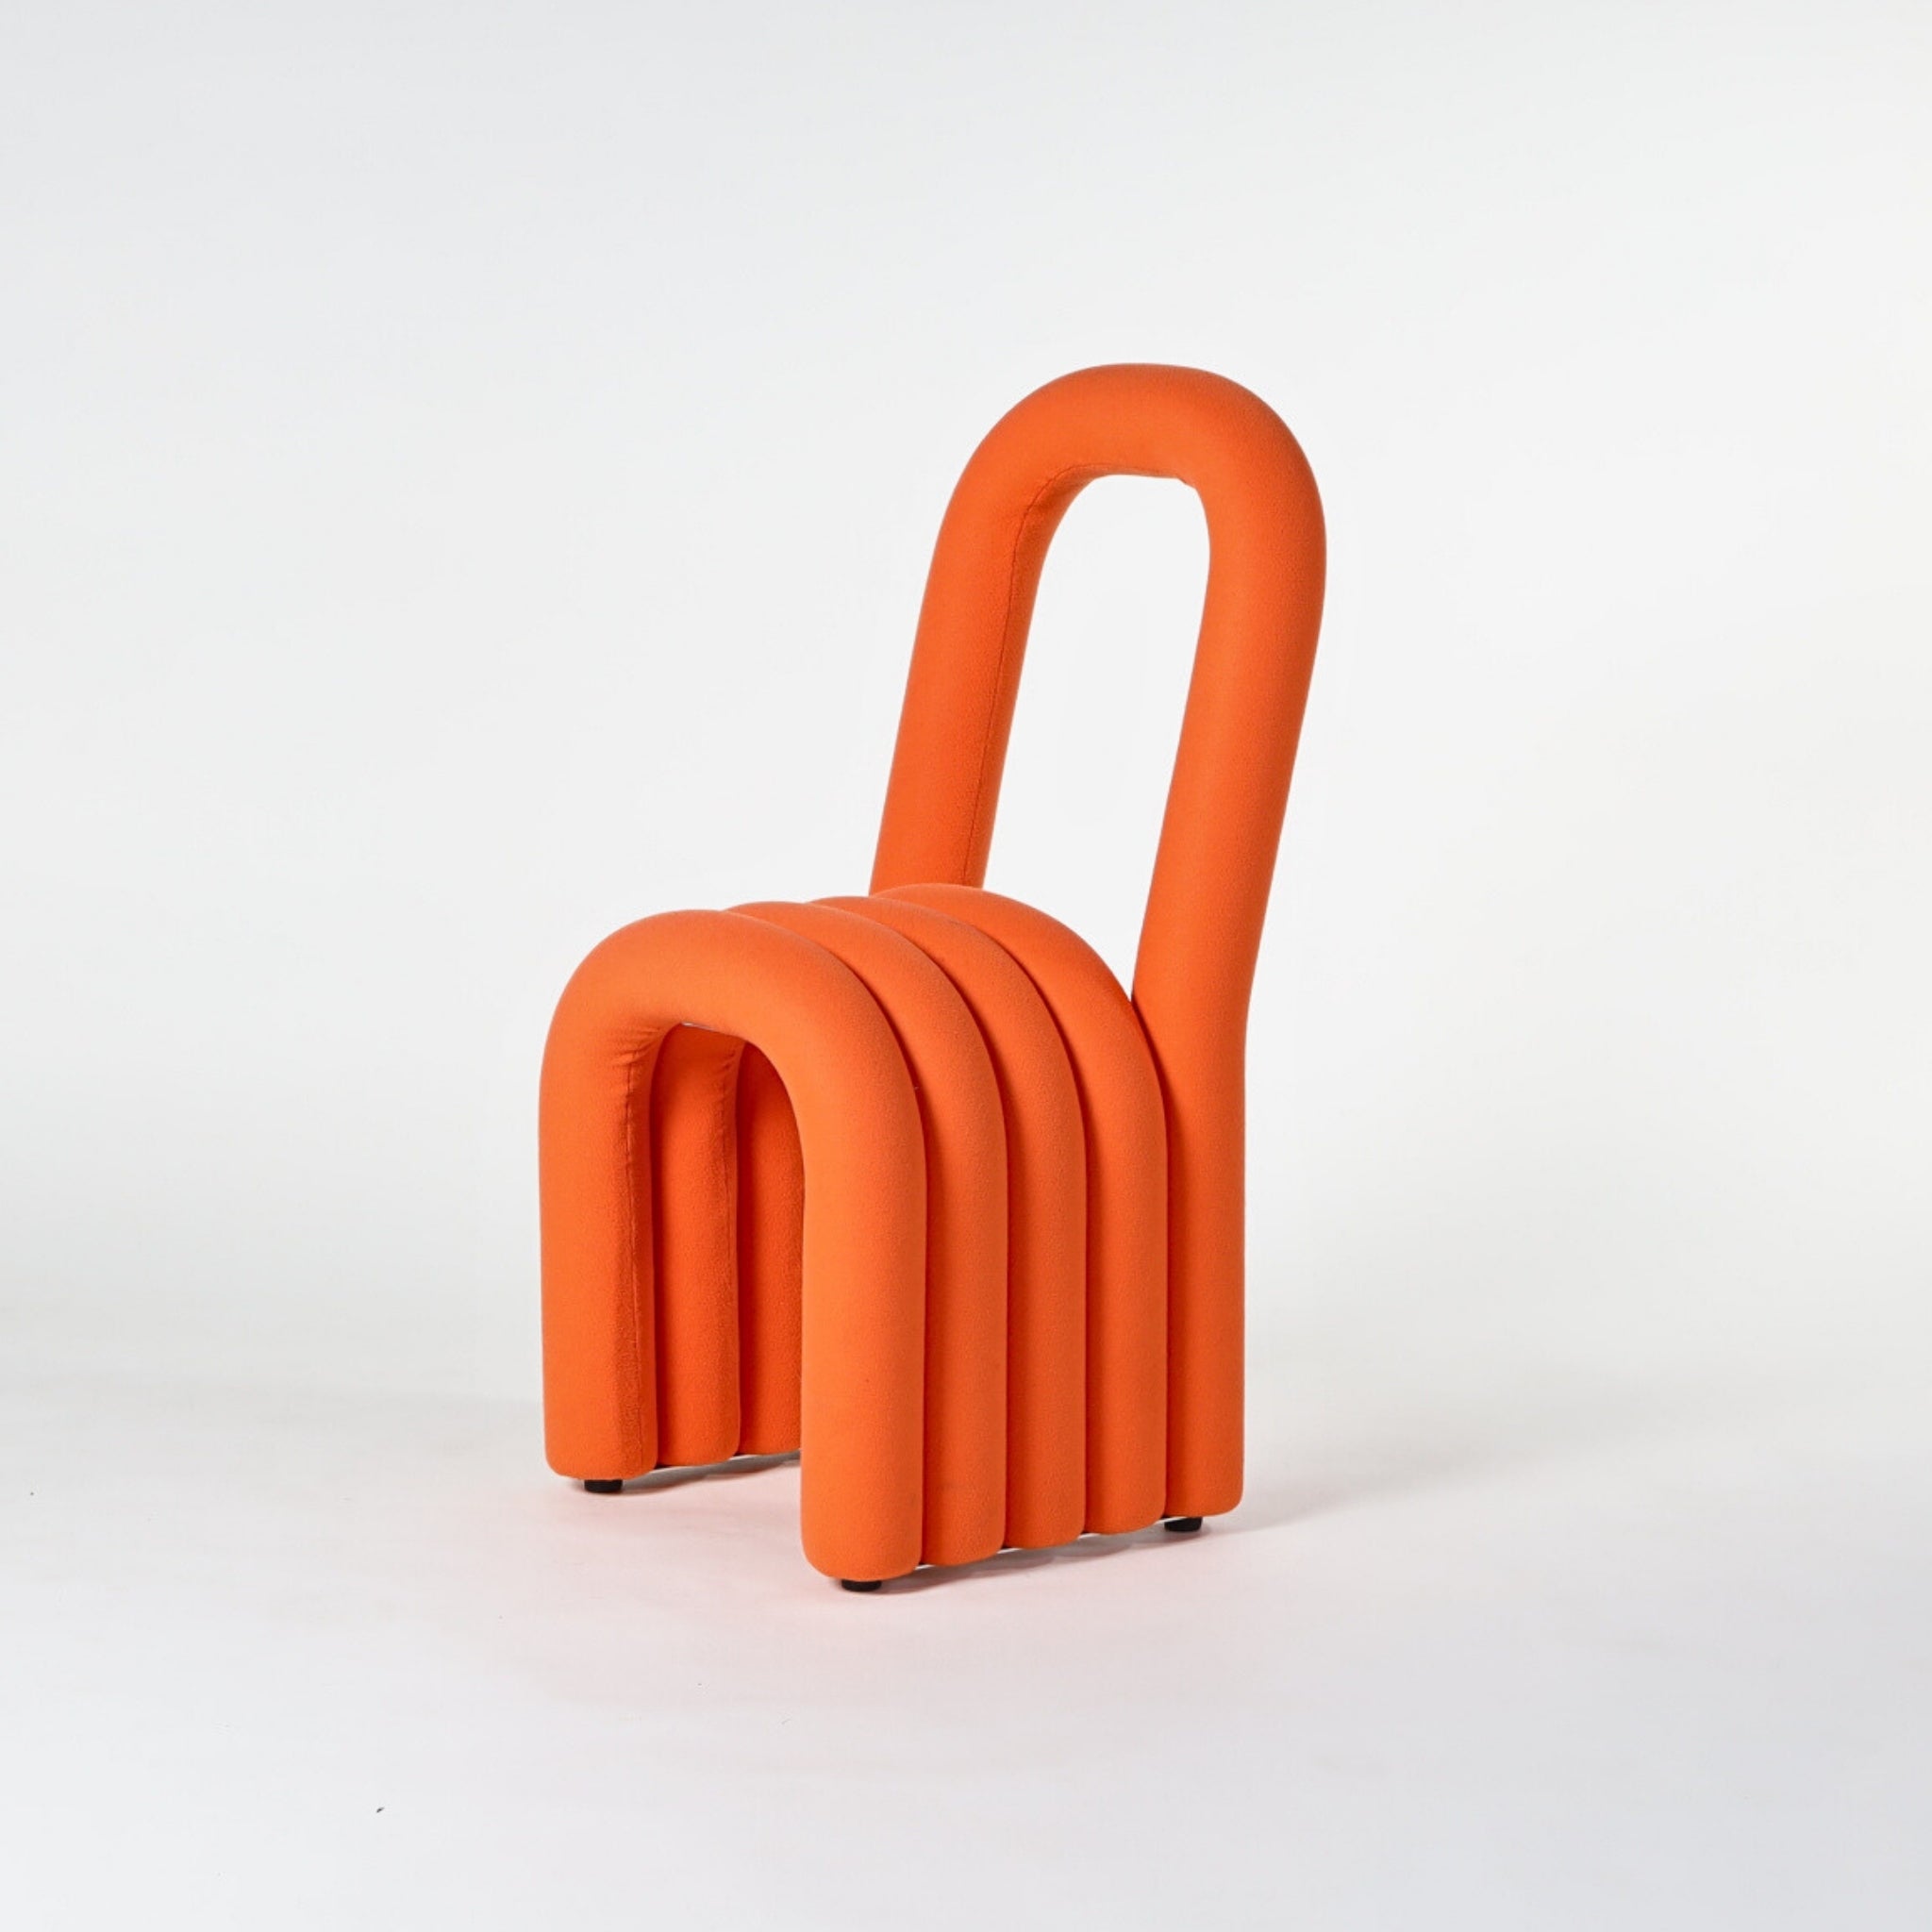 Stockholm Chair - The Feelter